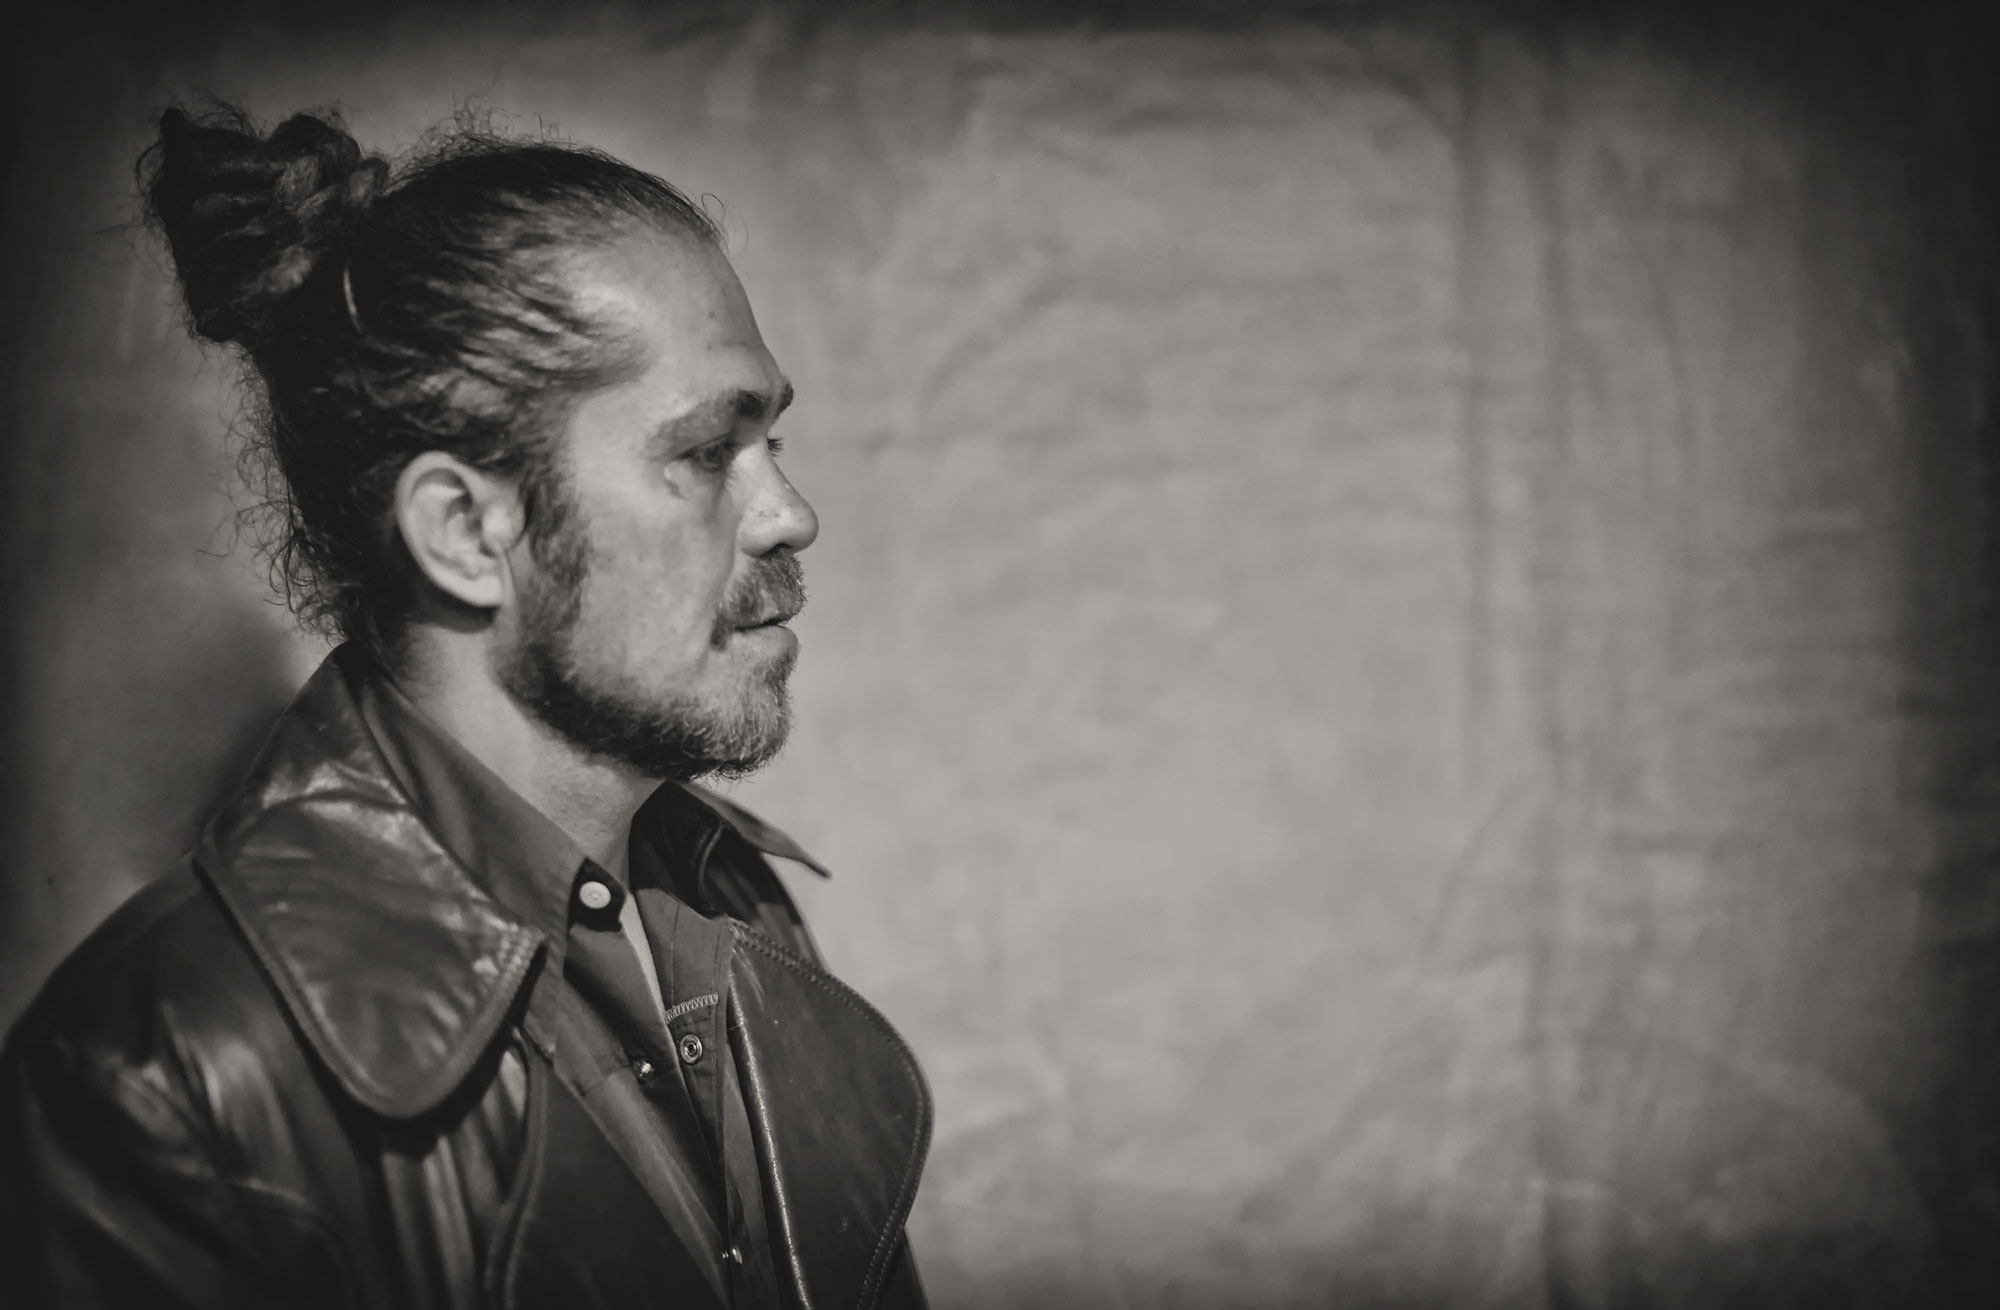 Premiere: Citizen Cope’s New Song from First Album in 7 Years, ‘Heroin and Helicopters’